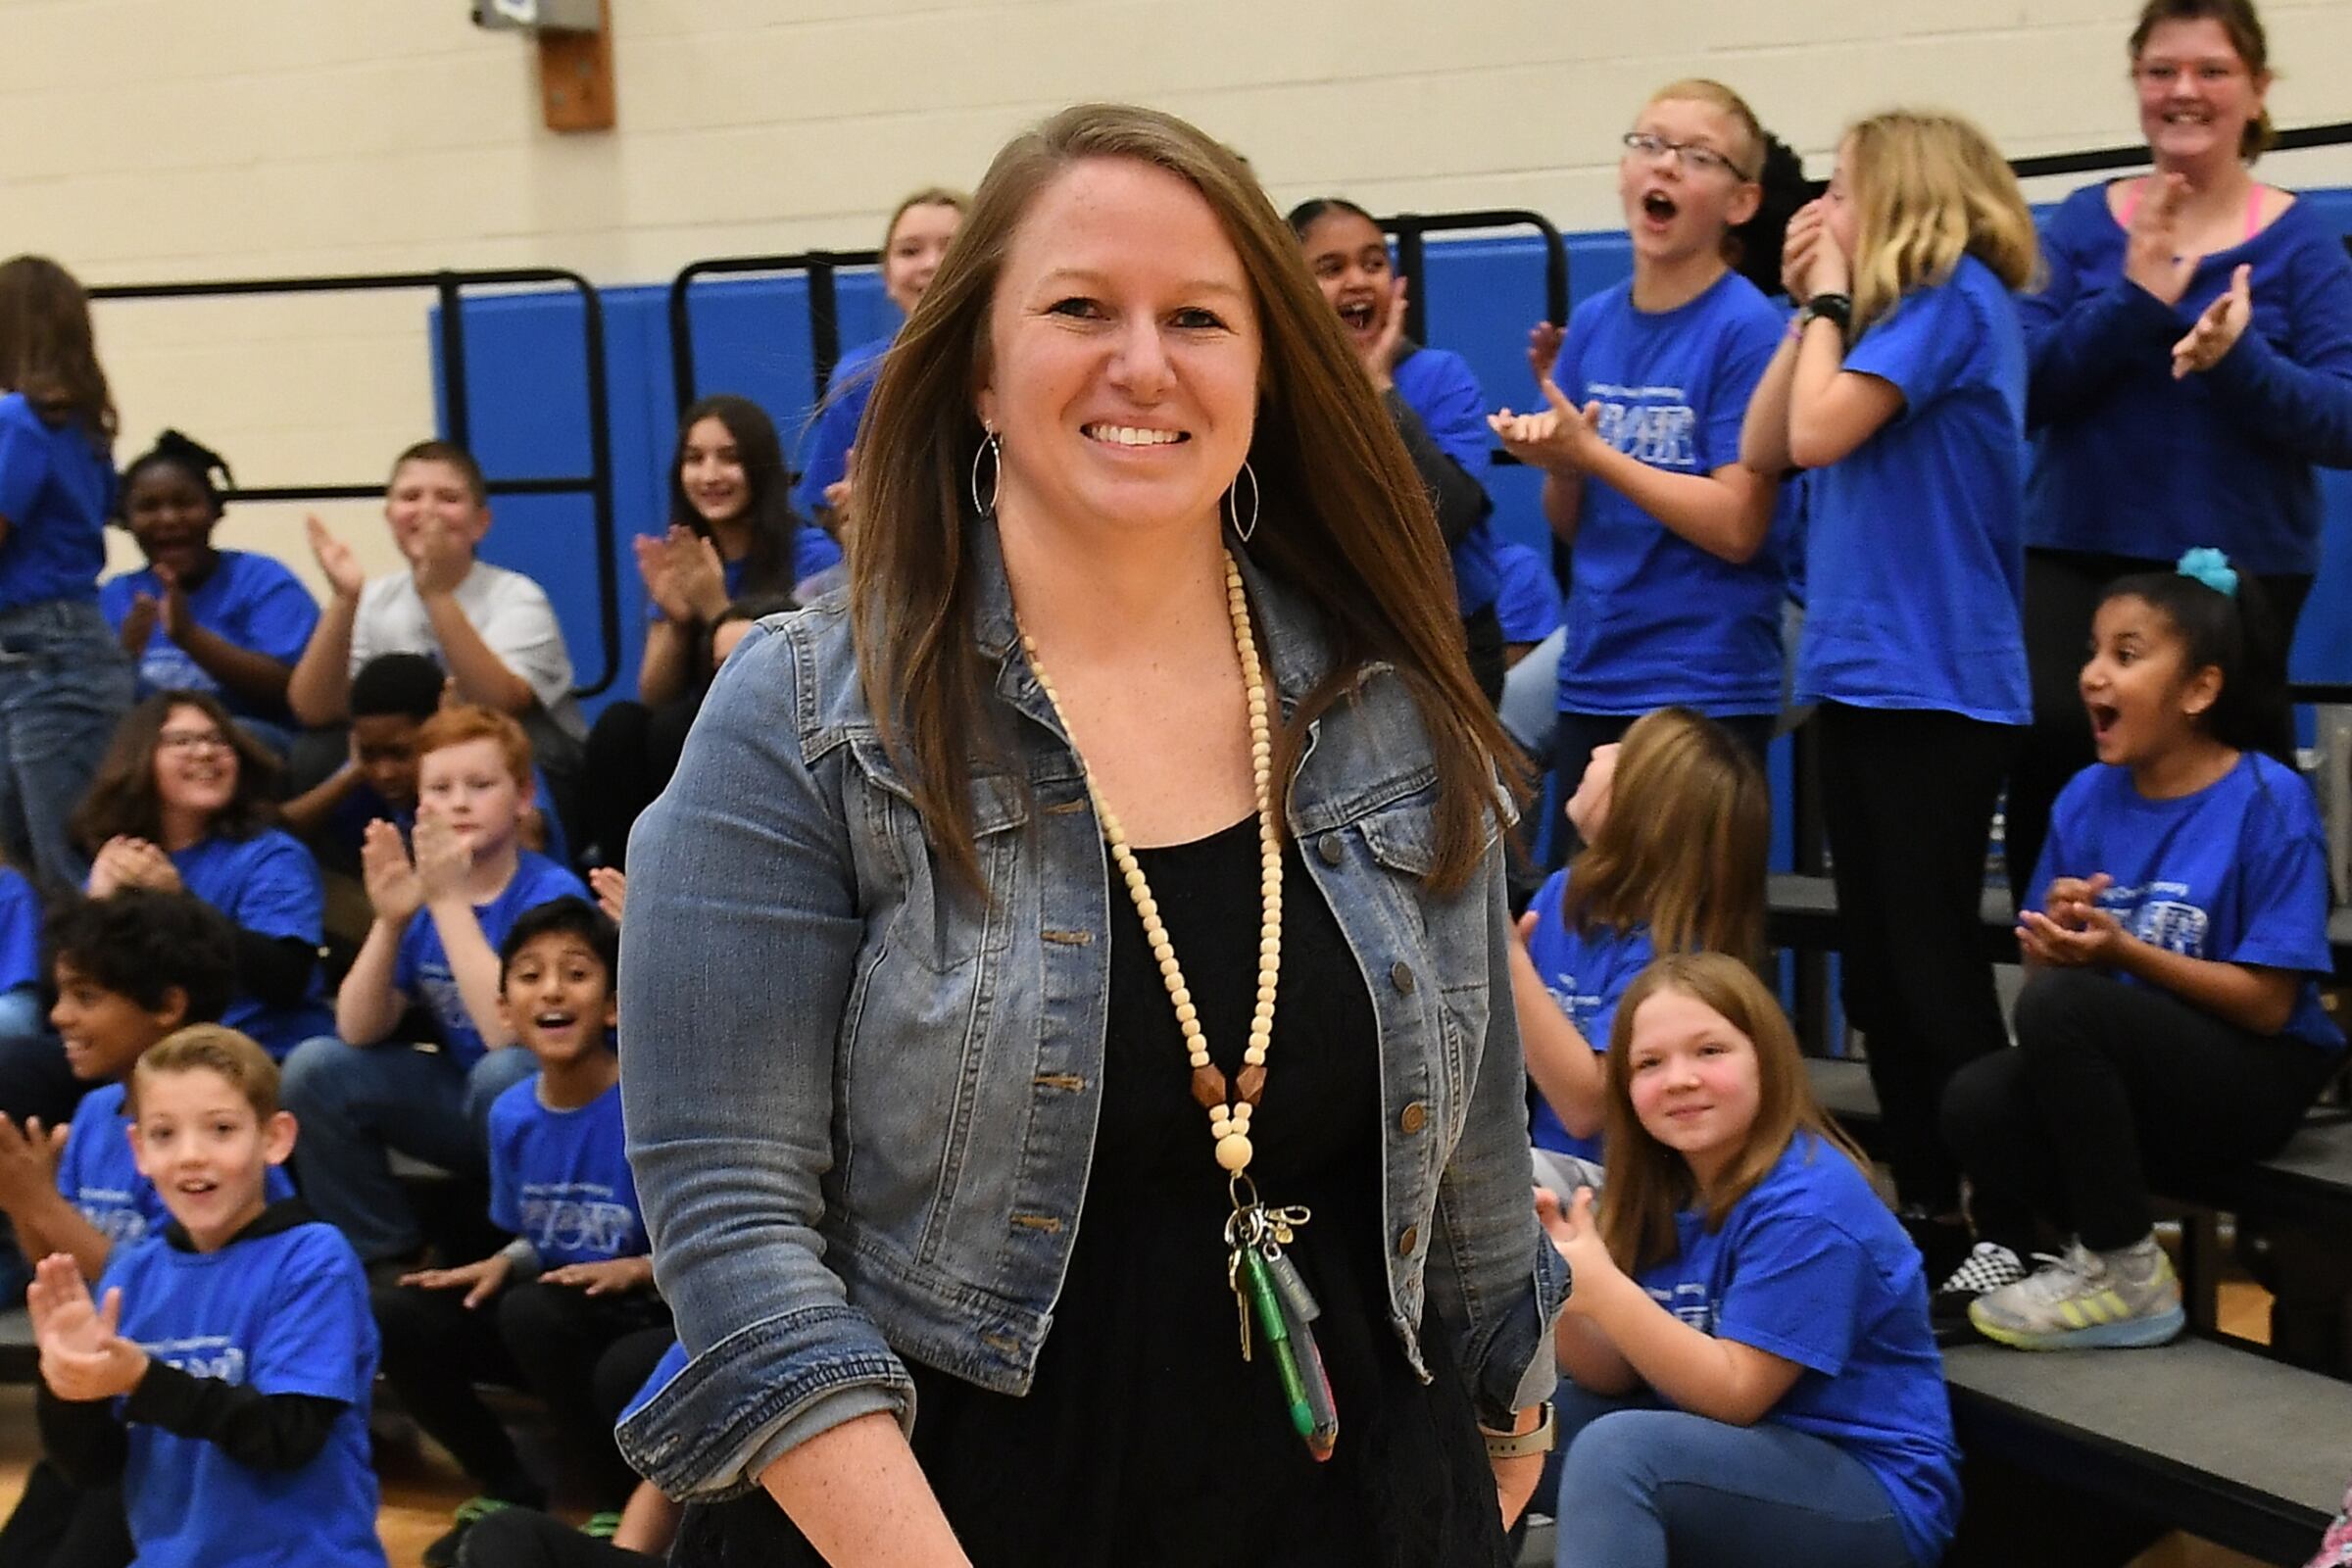 Angela Fowler is shown in a denim jacket and black top as she walks past bleachers full of students in blue t-shirts to accept an award. 